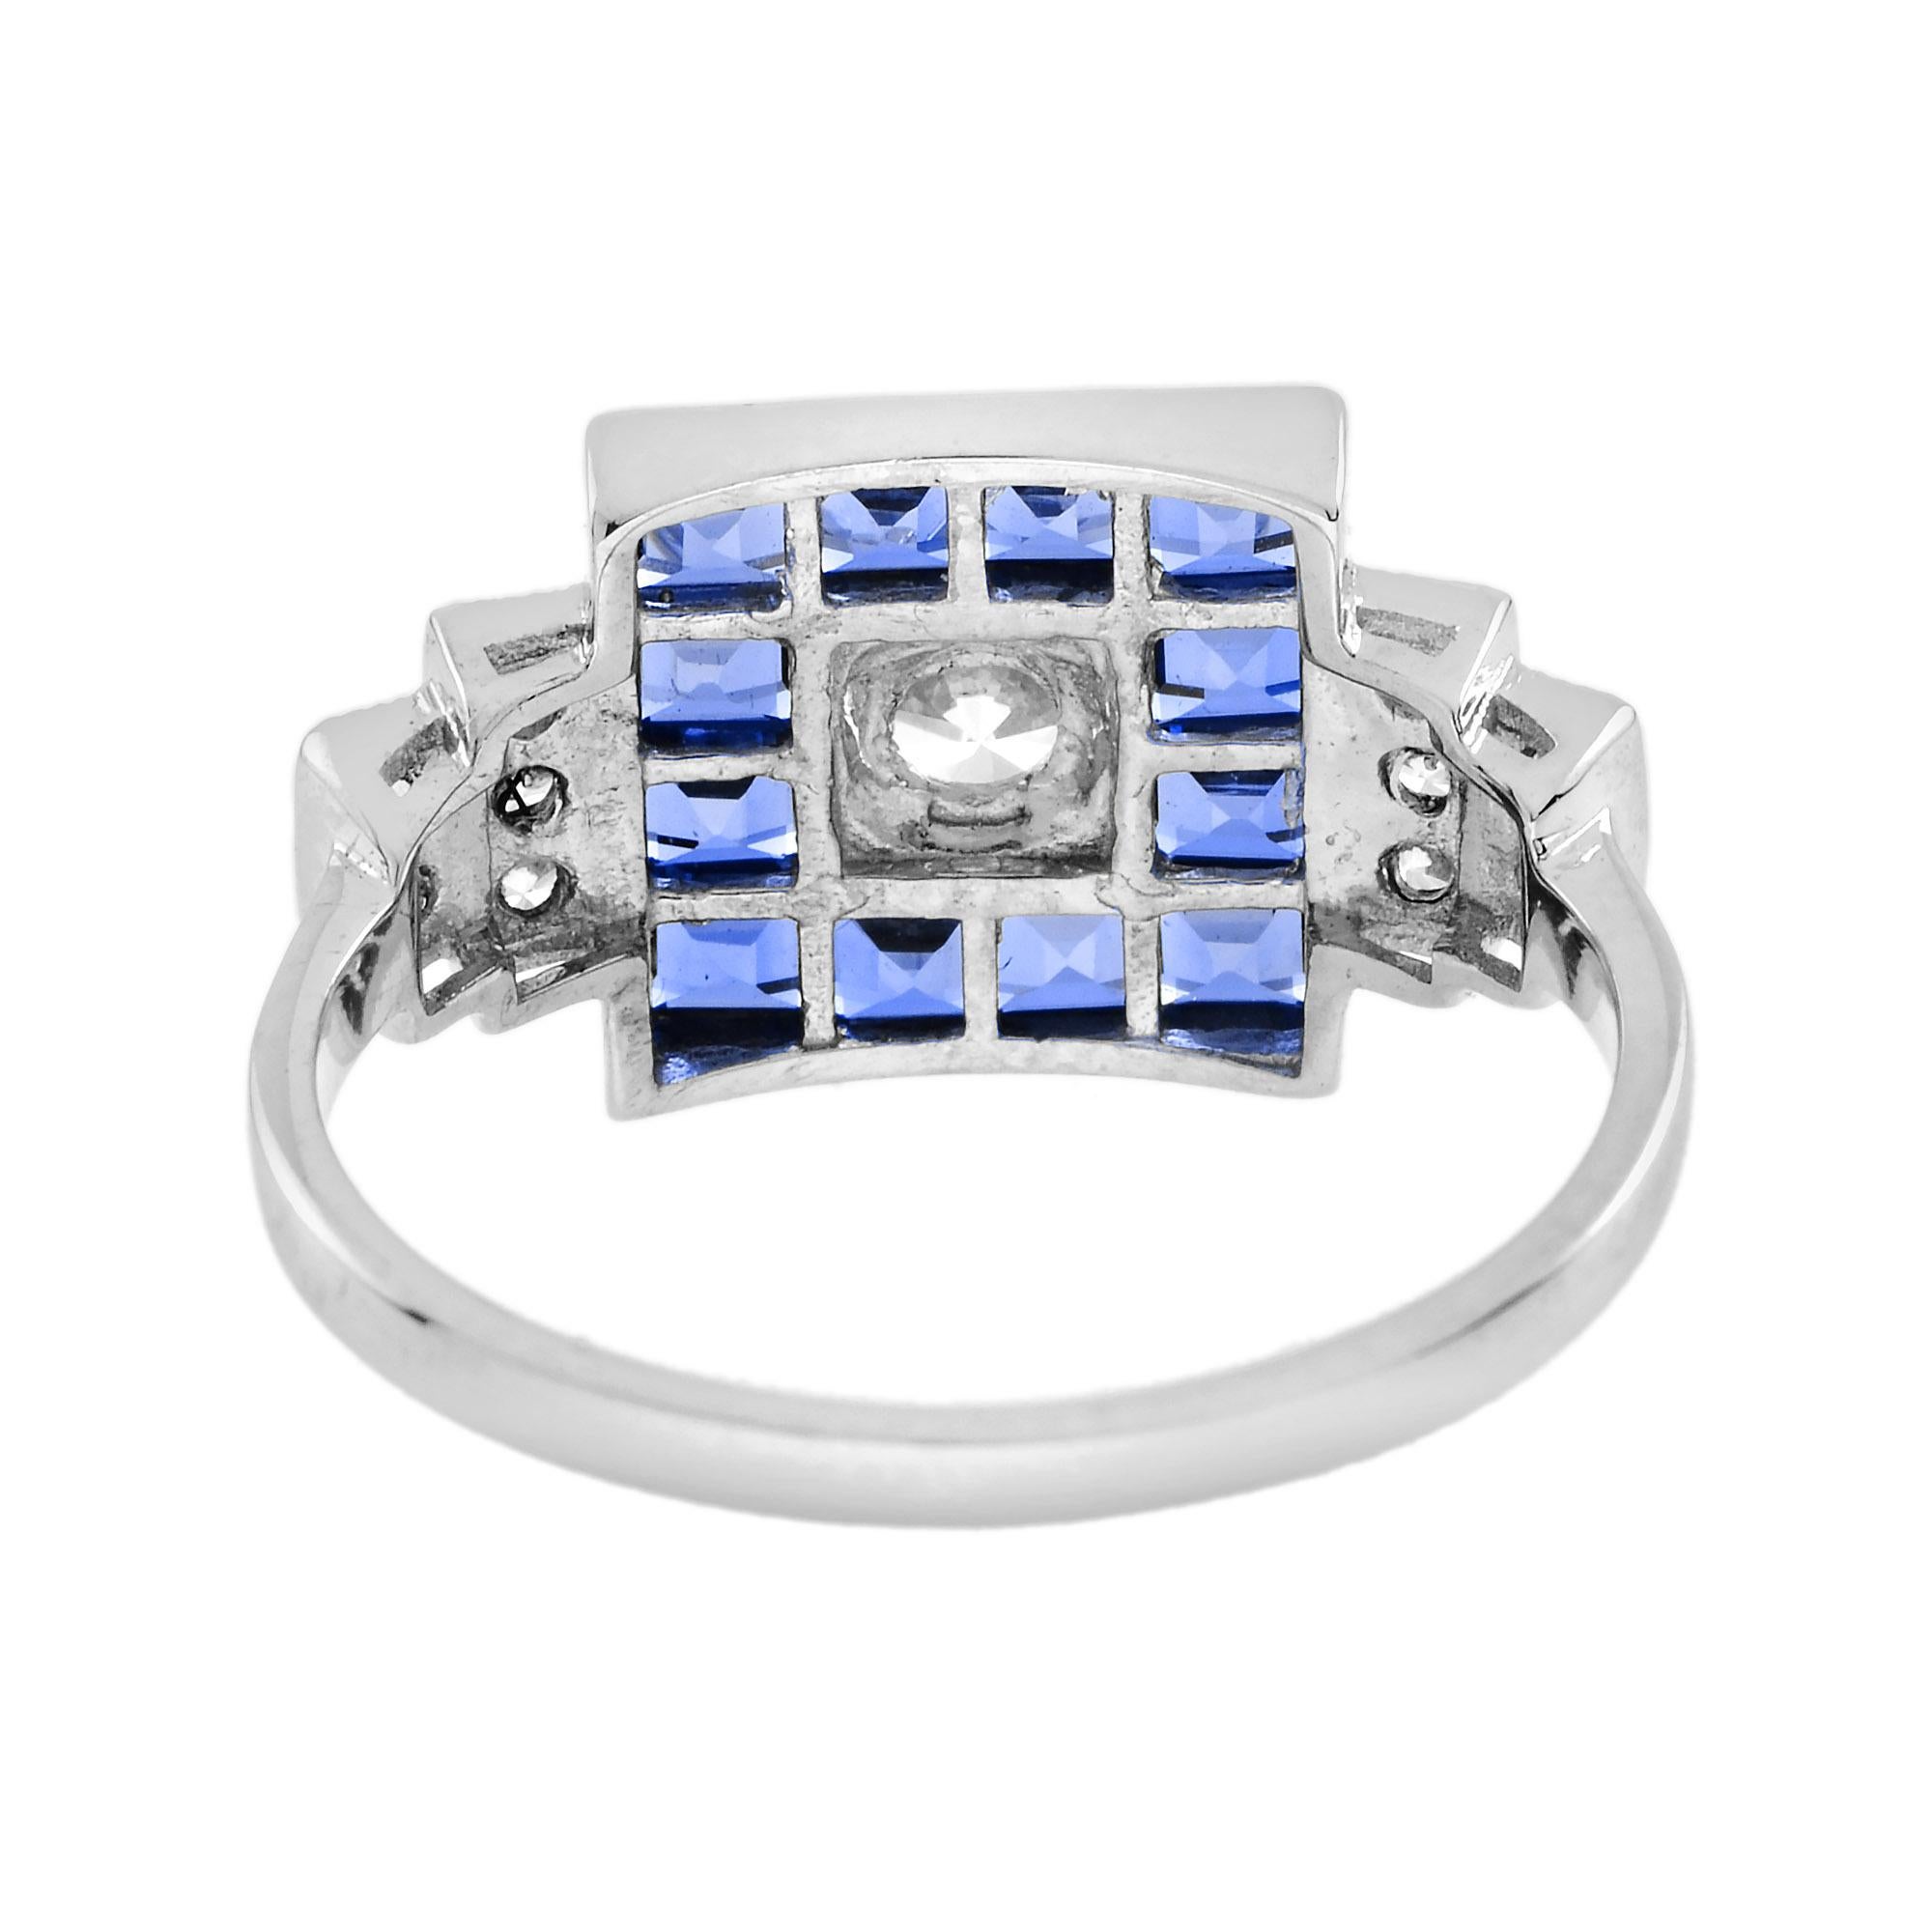 For Sale:  Diamond Blue Sapphire Art Deco Style Square Shape Engagement Ring in 18K Gold 5